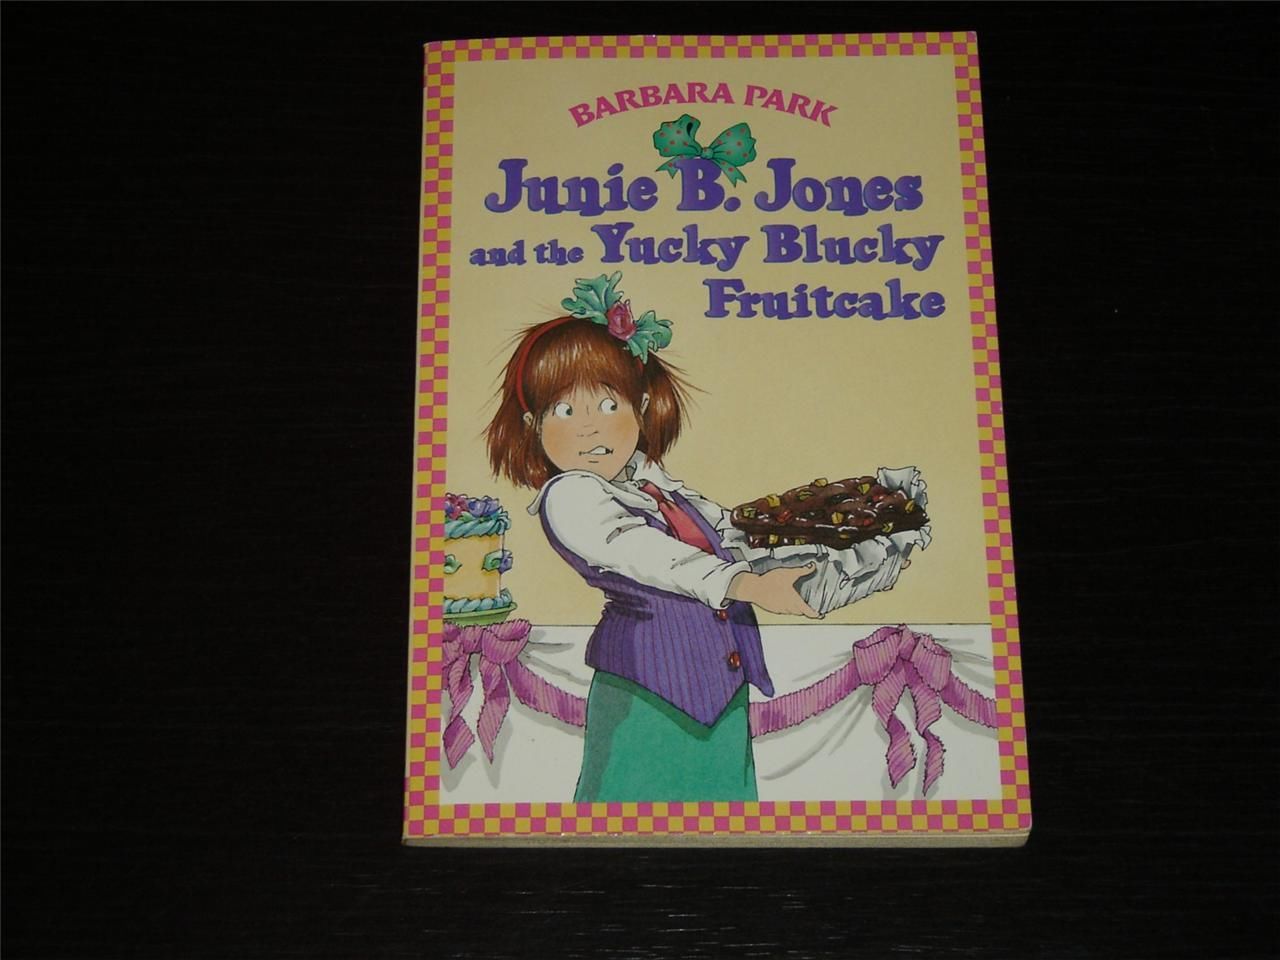 Primary image for Junie B. Jones and the Yucky Blucky Fruitcake by Barbara Park (1995, Paperback)